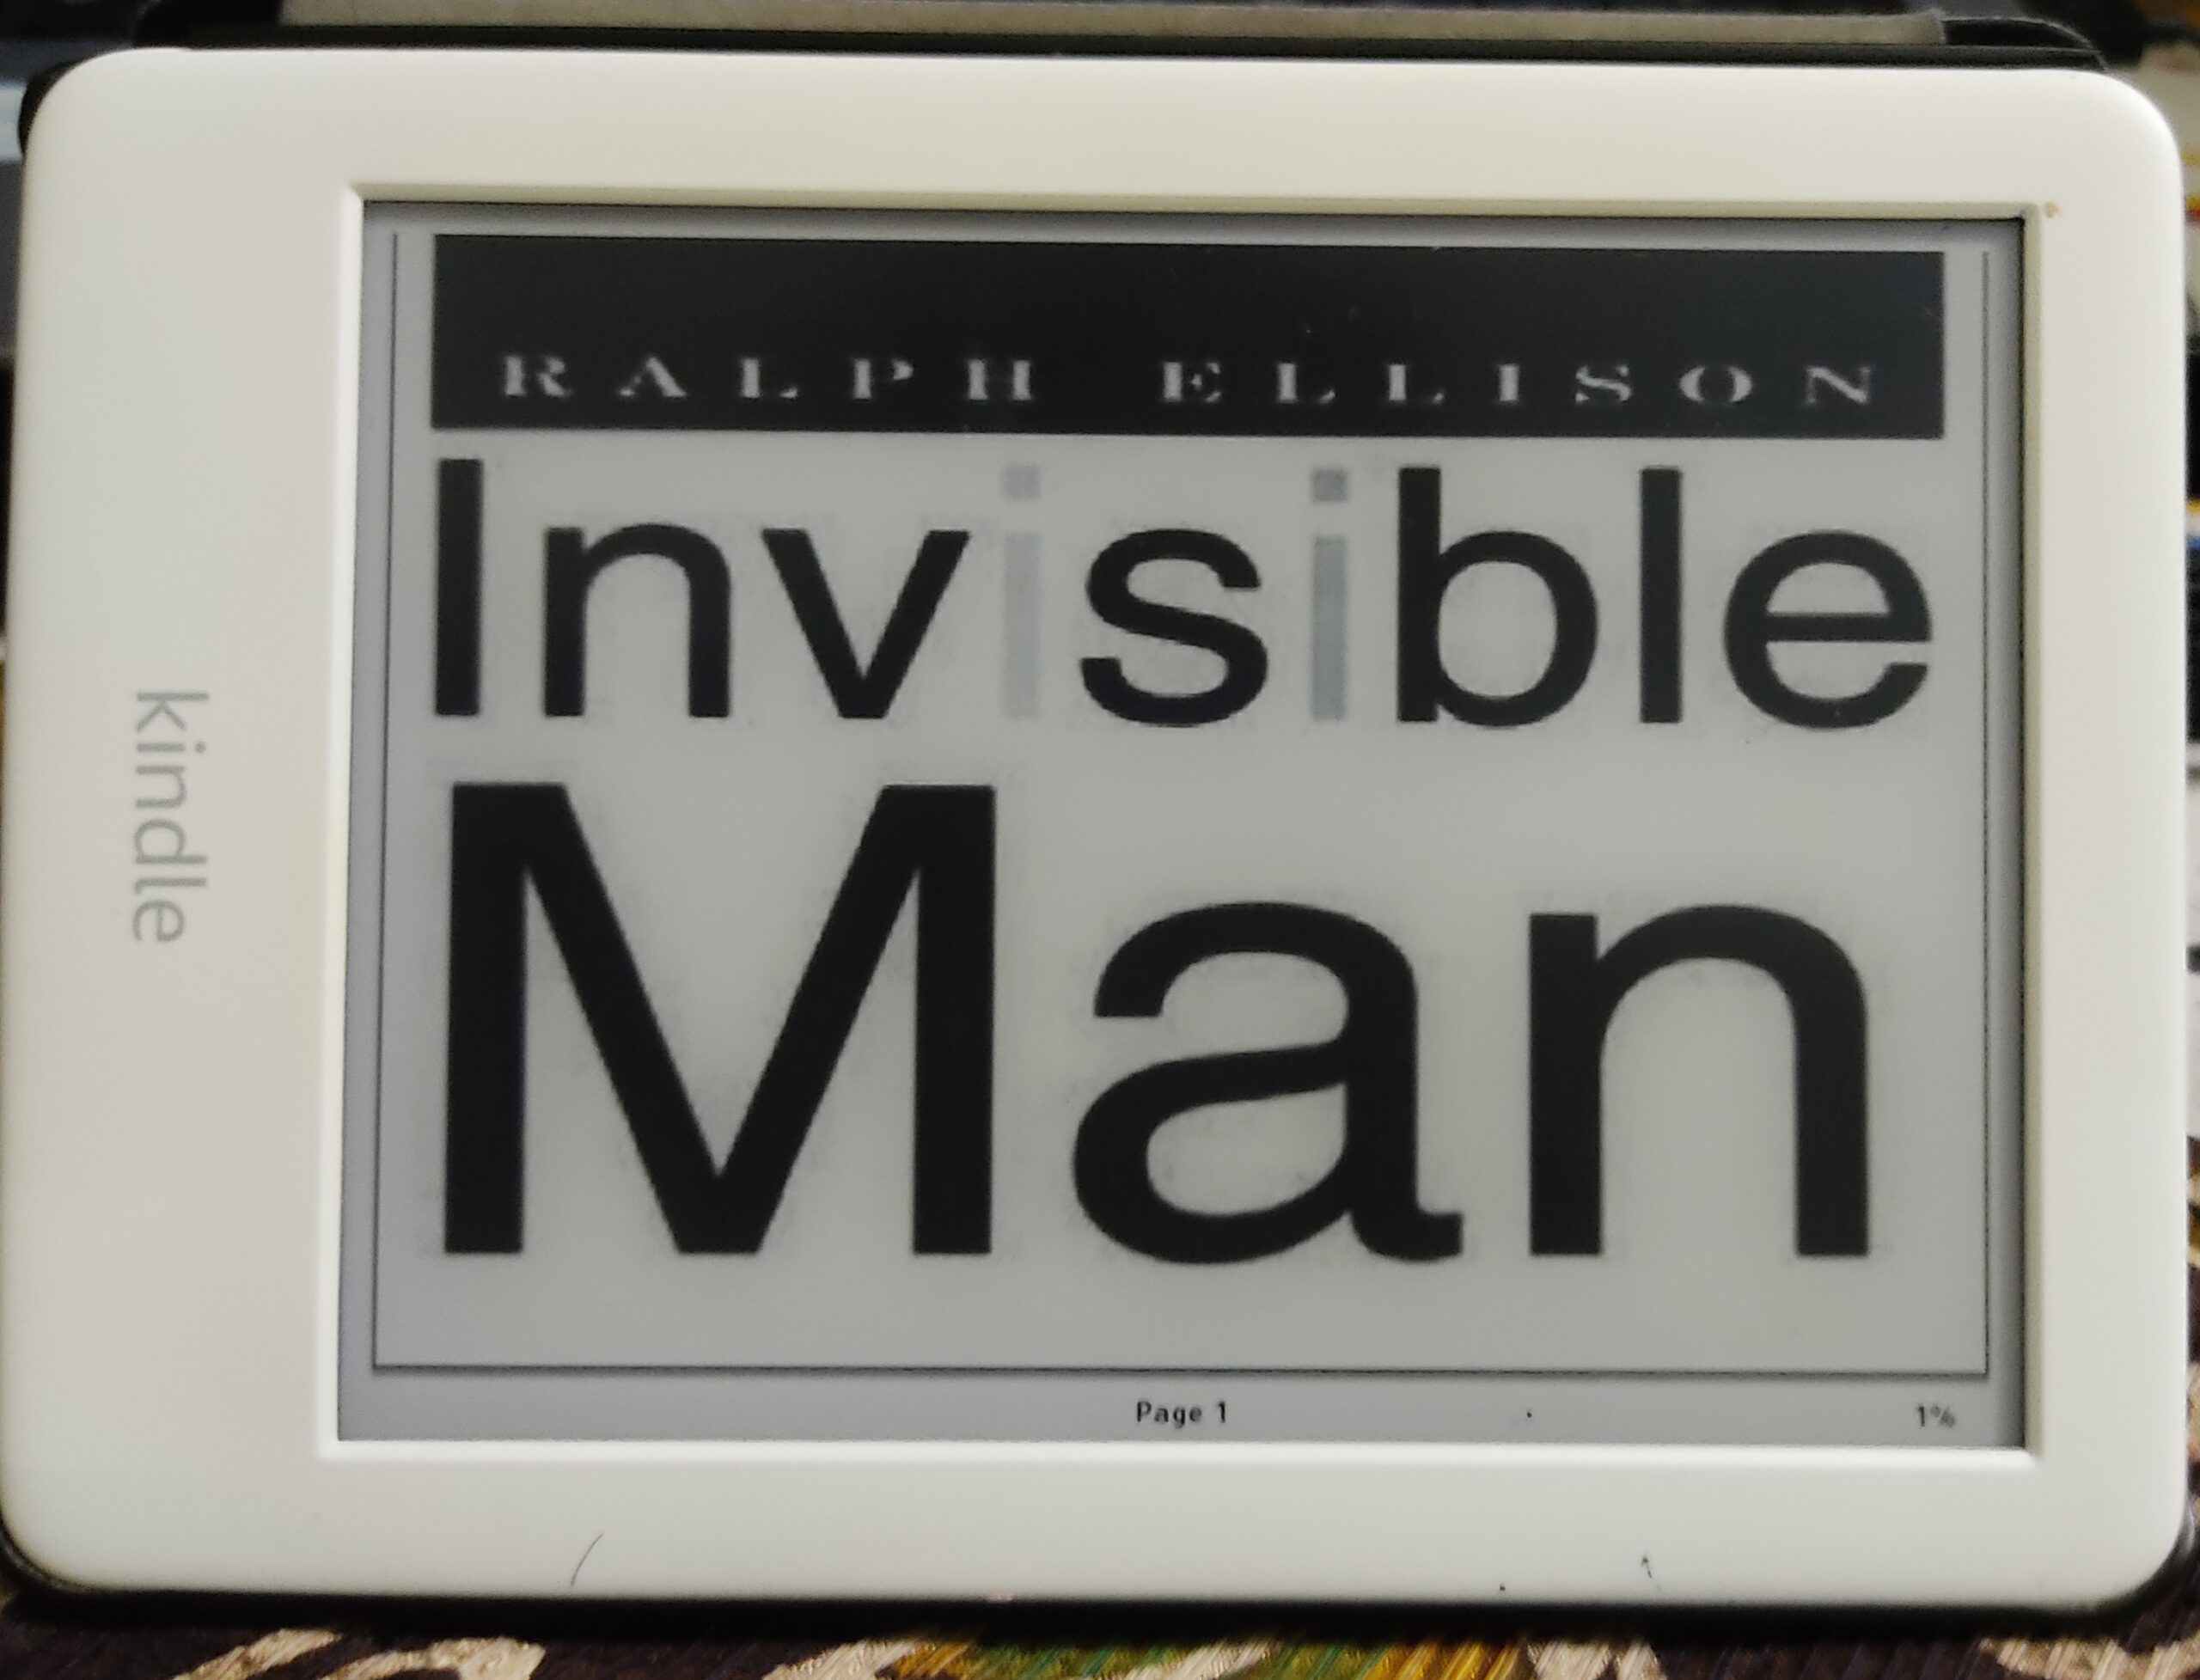 the invisible man book review ralph ellison